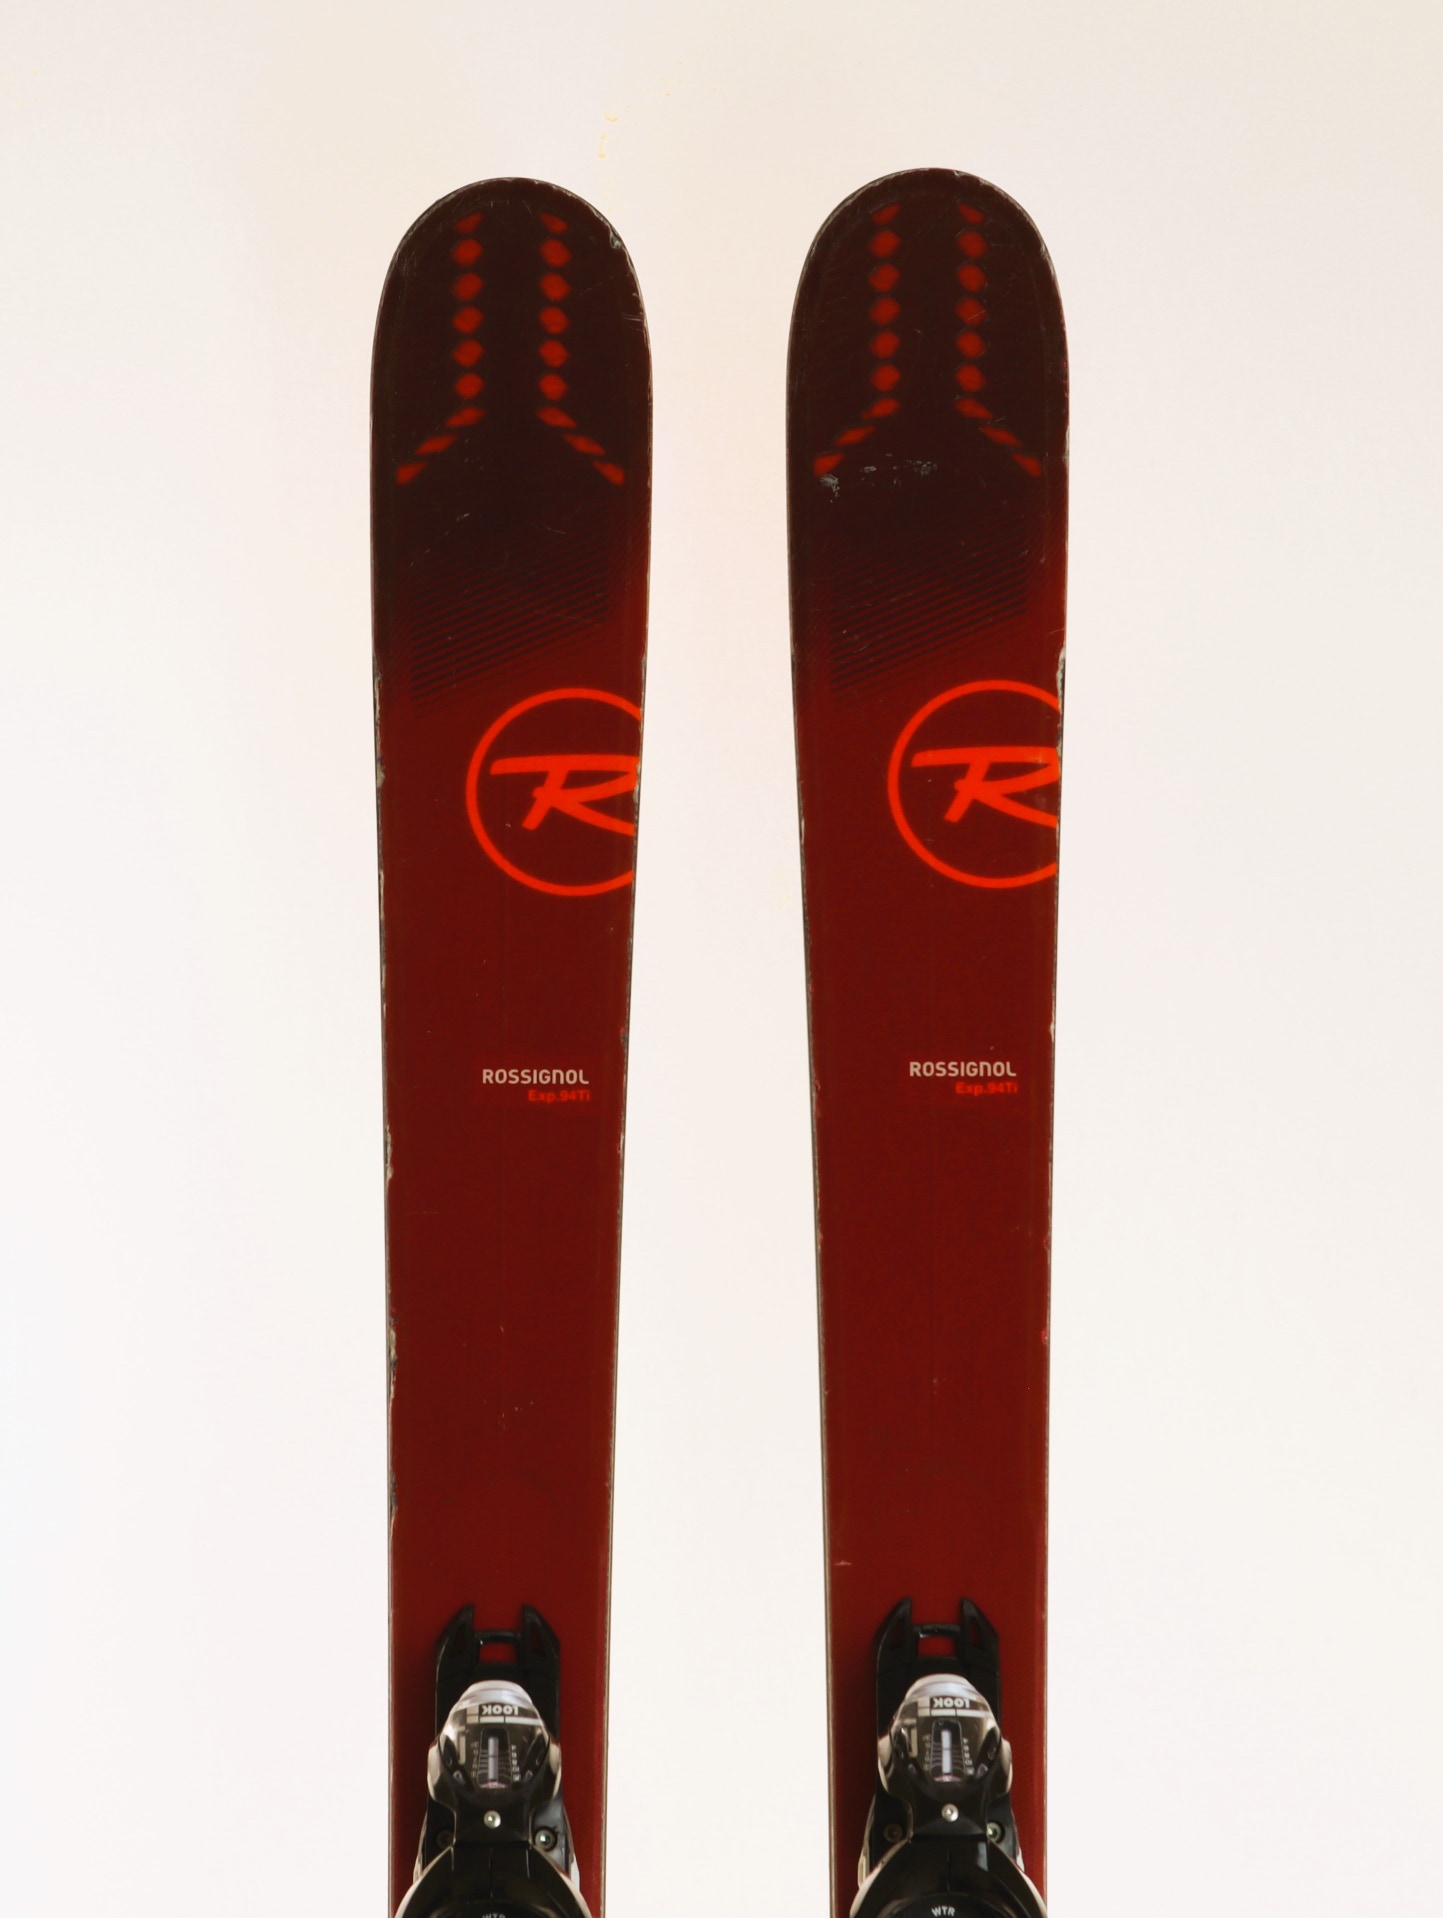 Used 2020 Rossignol Experience 94 Ti Demo Ski with Look SPX 12 Bindings Size 173 (Option 231287)